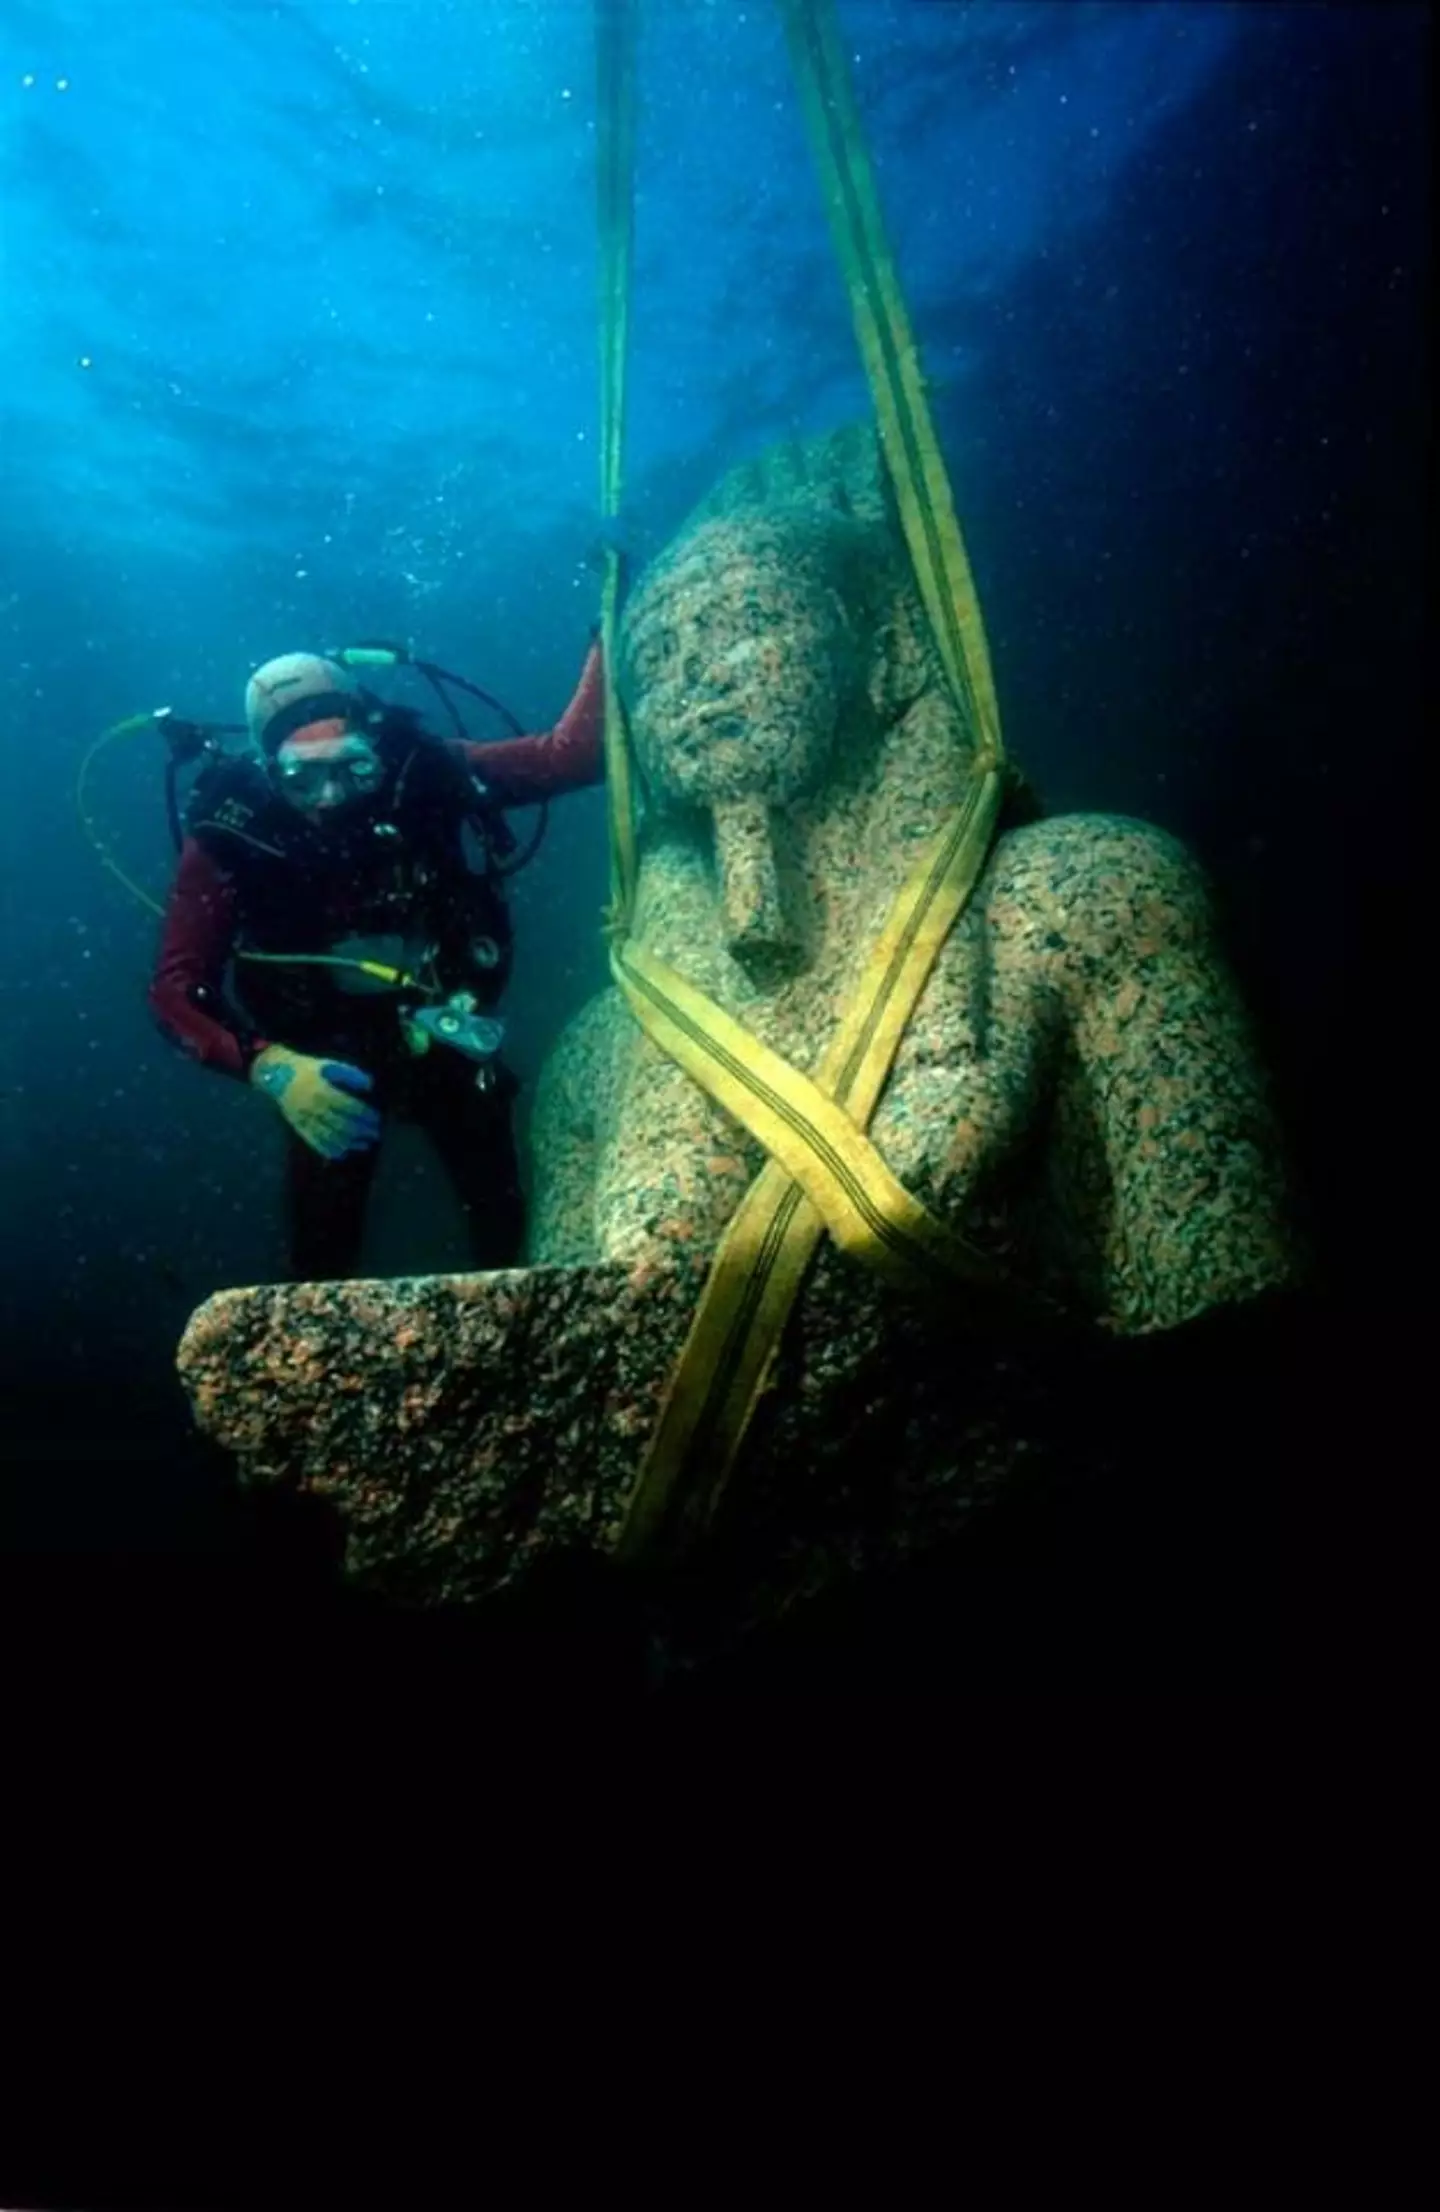 French marine archaeologist Franck Goddio discovered the ‘lost’ city two decades ago.